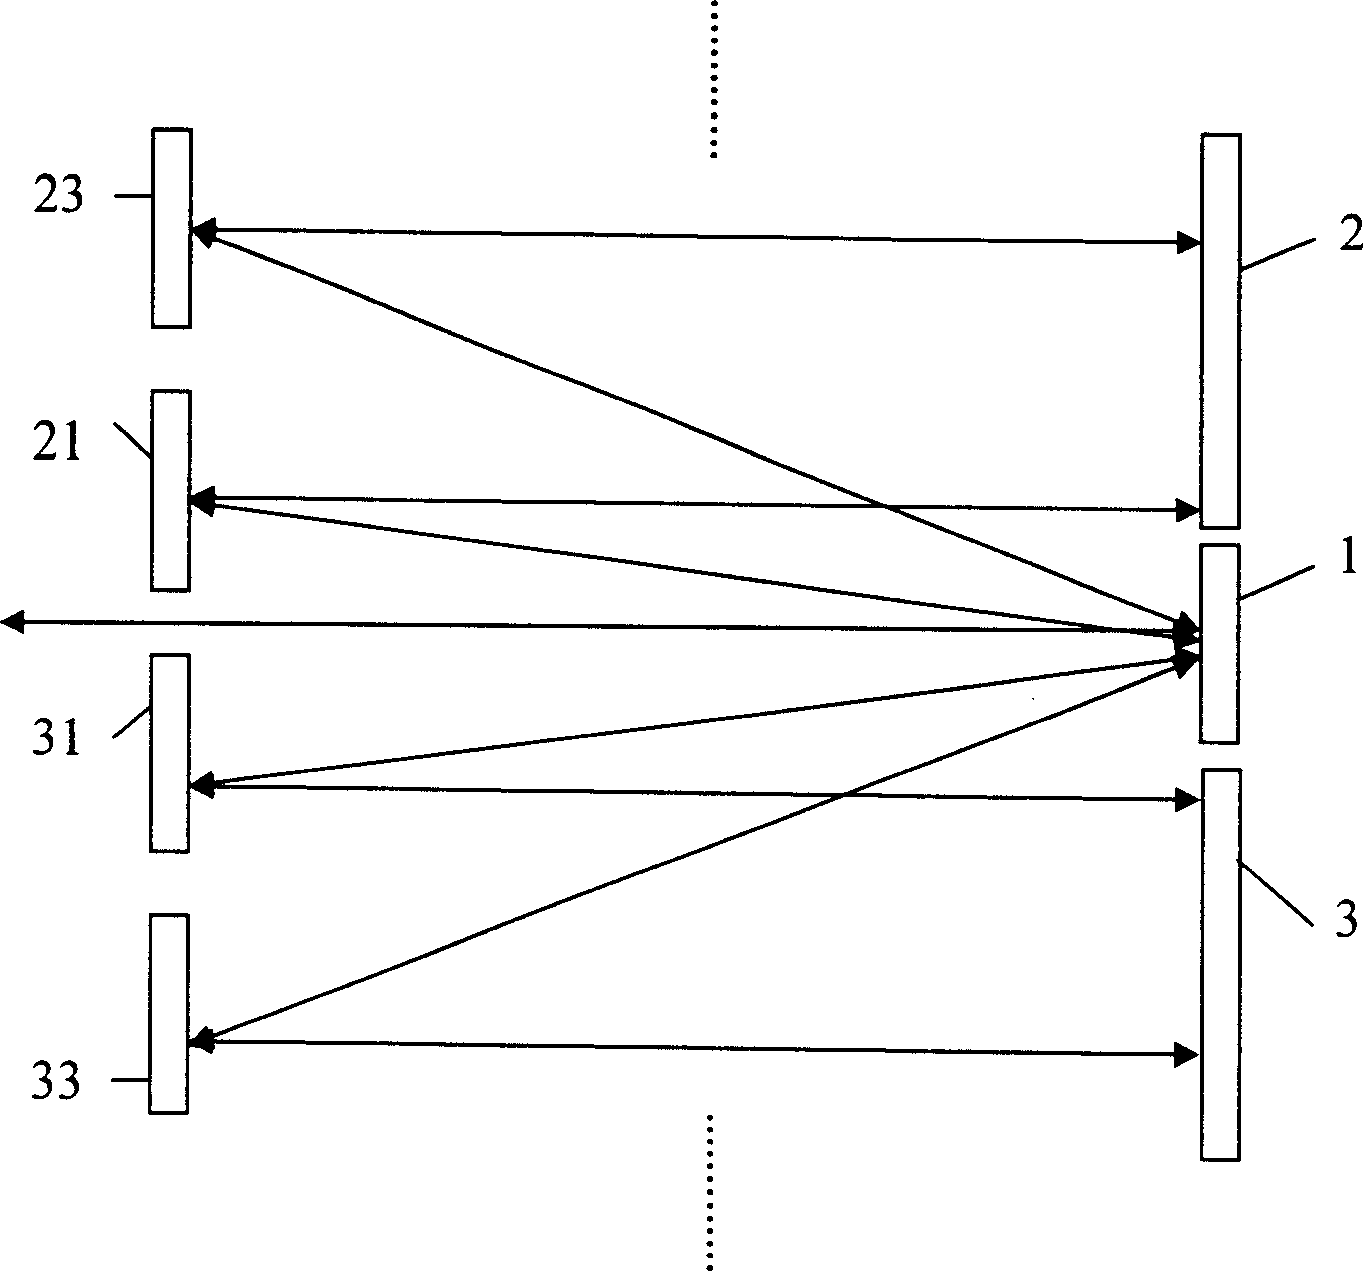 Apparatus for producing multi pulse by Dammann grating pair